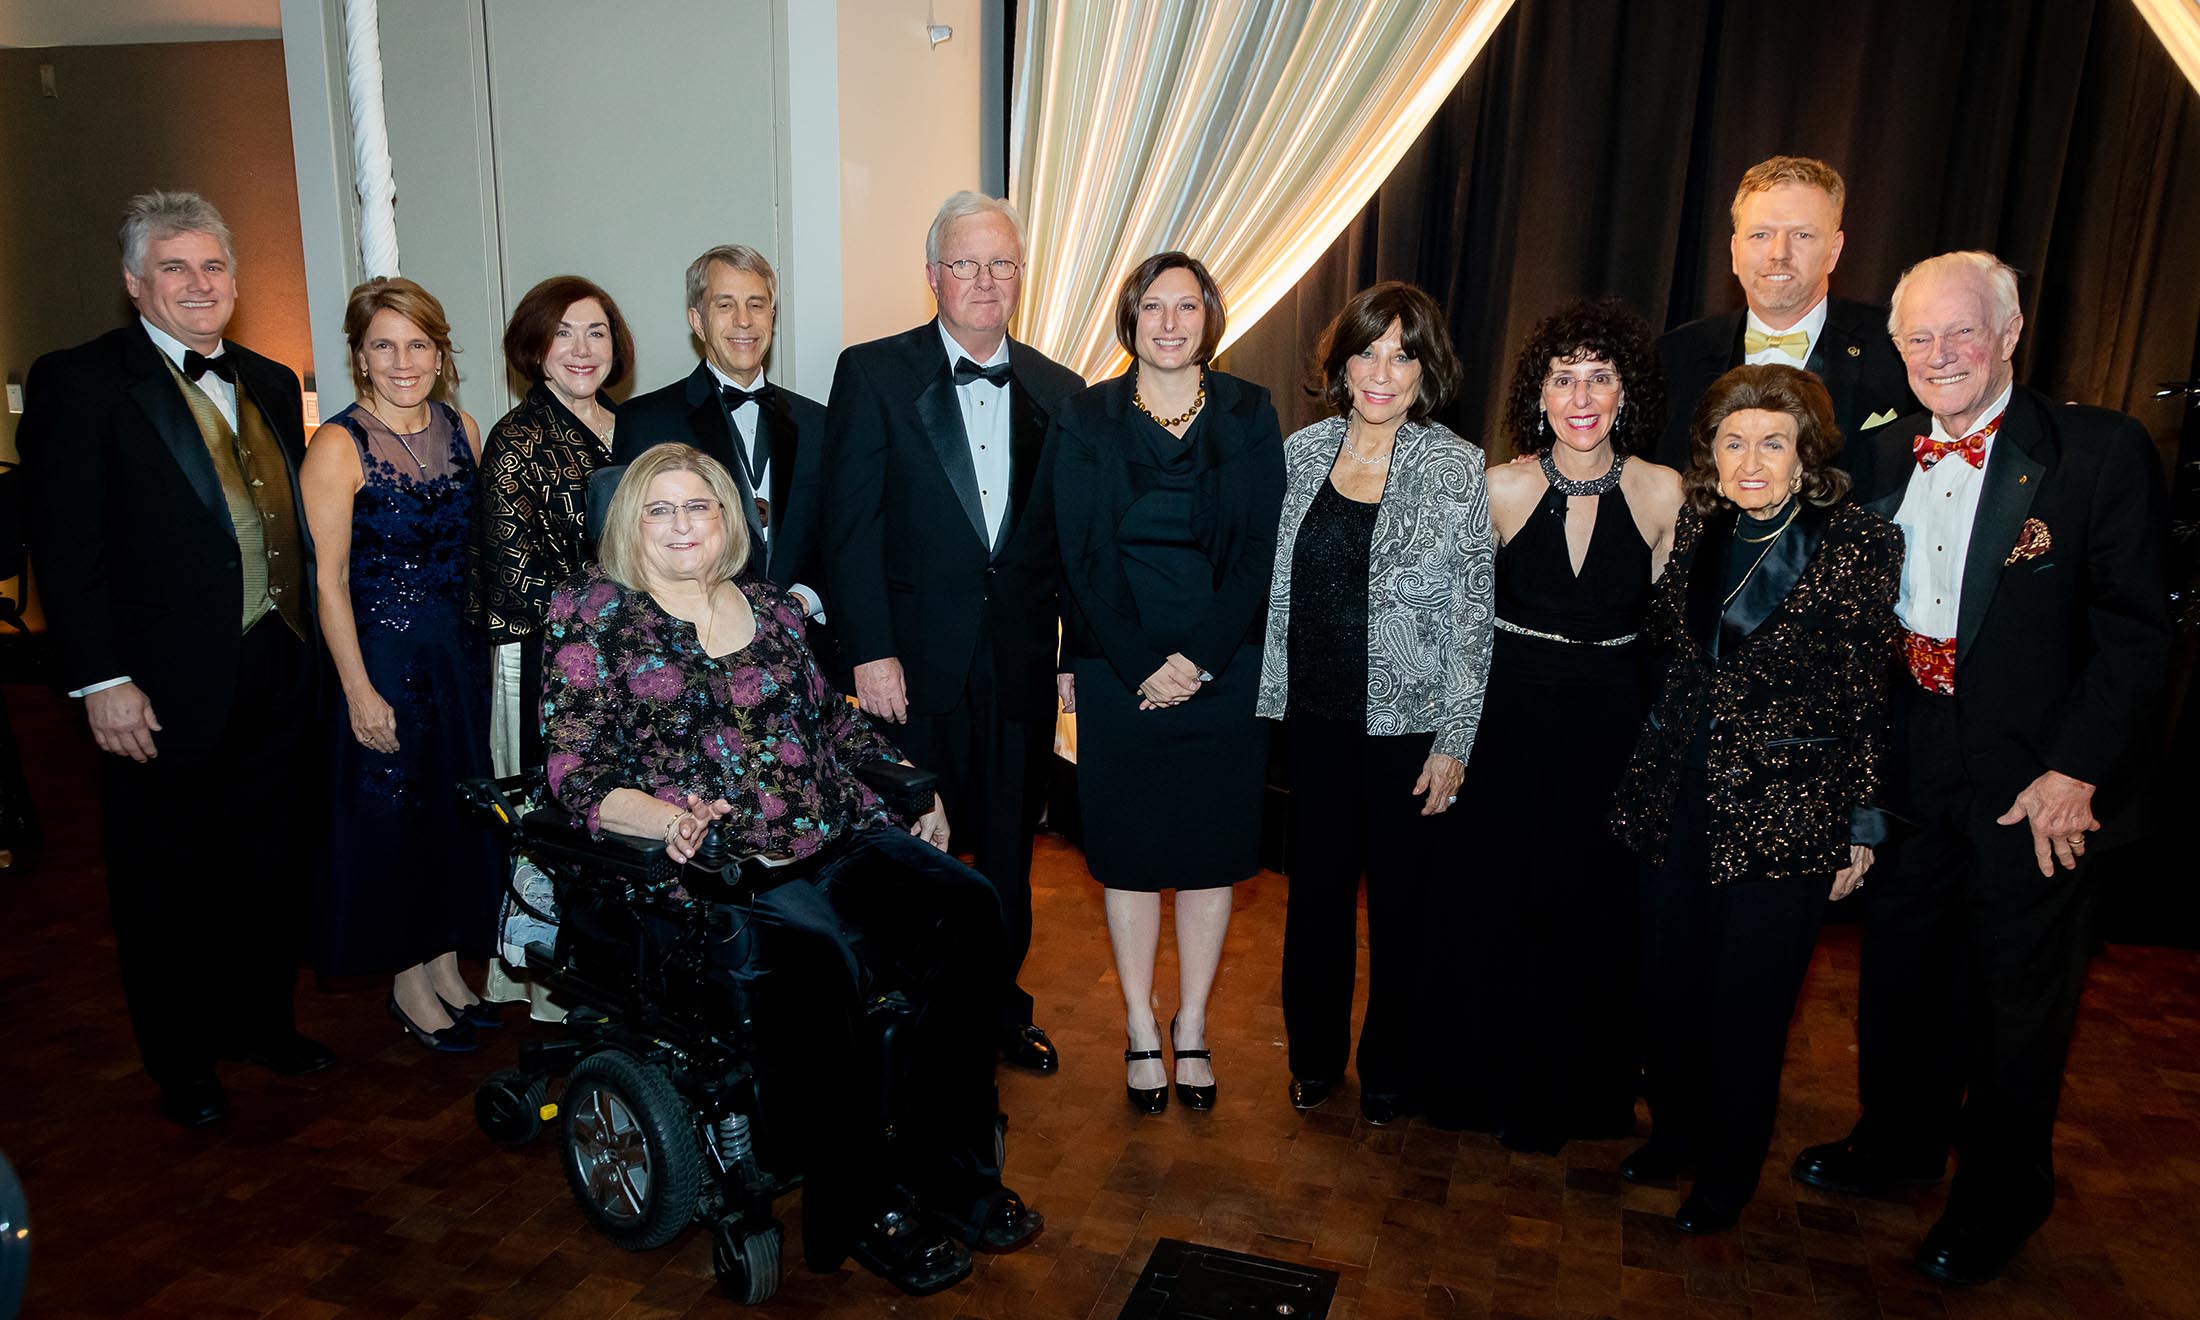 Group photo of steering committee at gala event